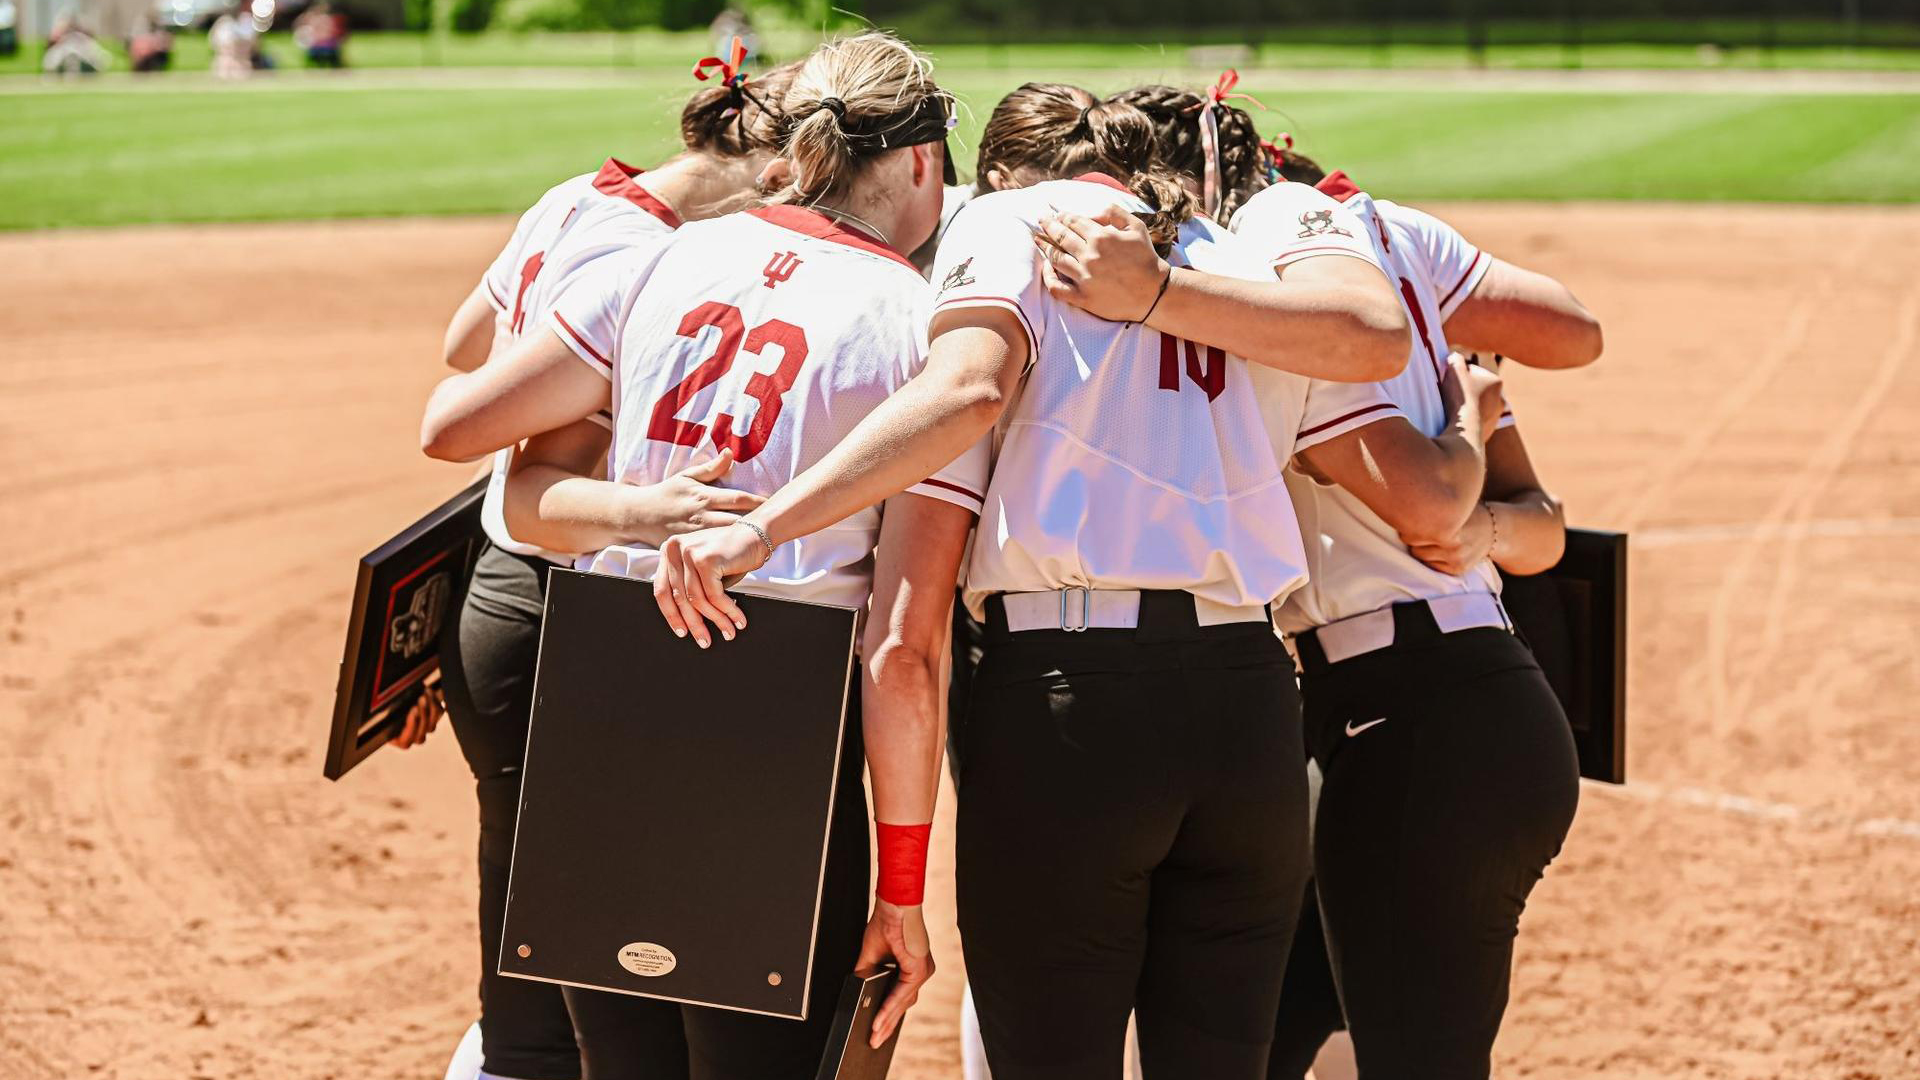 IU Southeast finished its season at 35-18 after being eliminated from the NAIA Softball National Championship Opening Round on Wednesday.